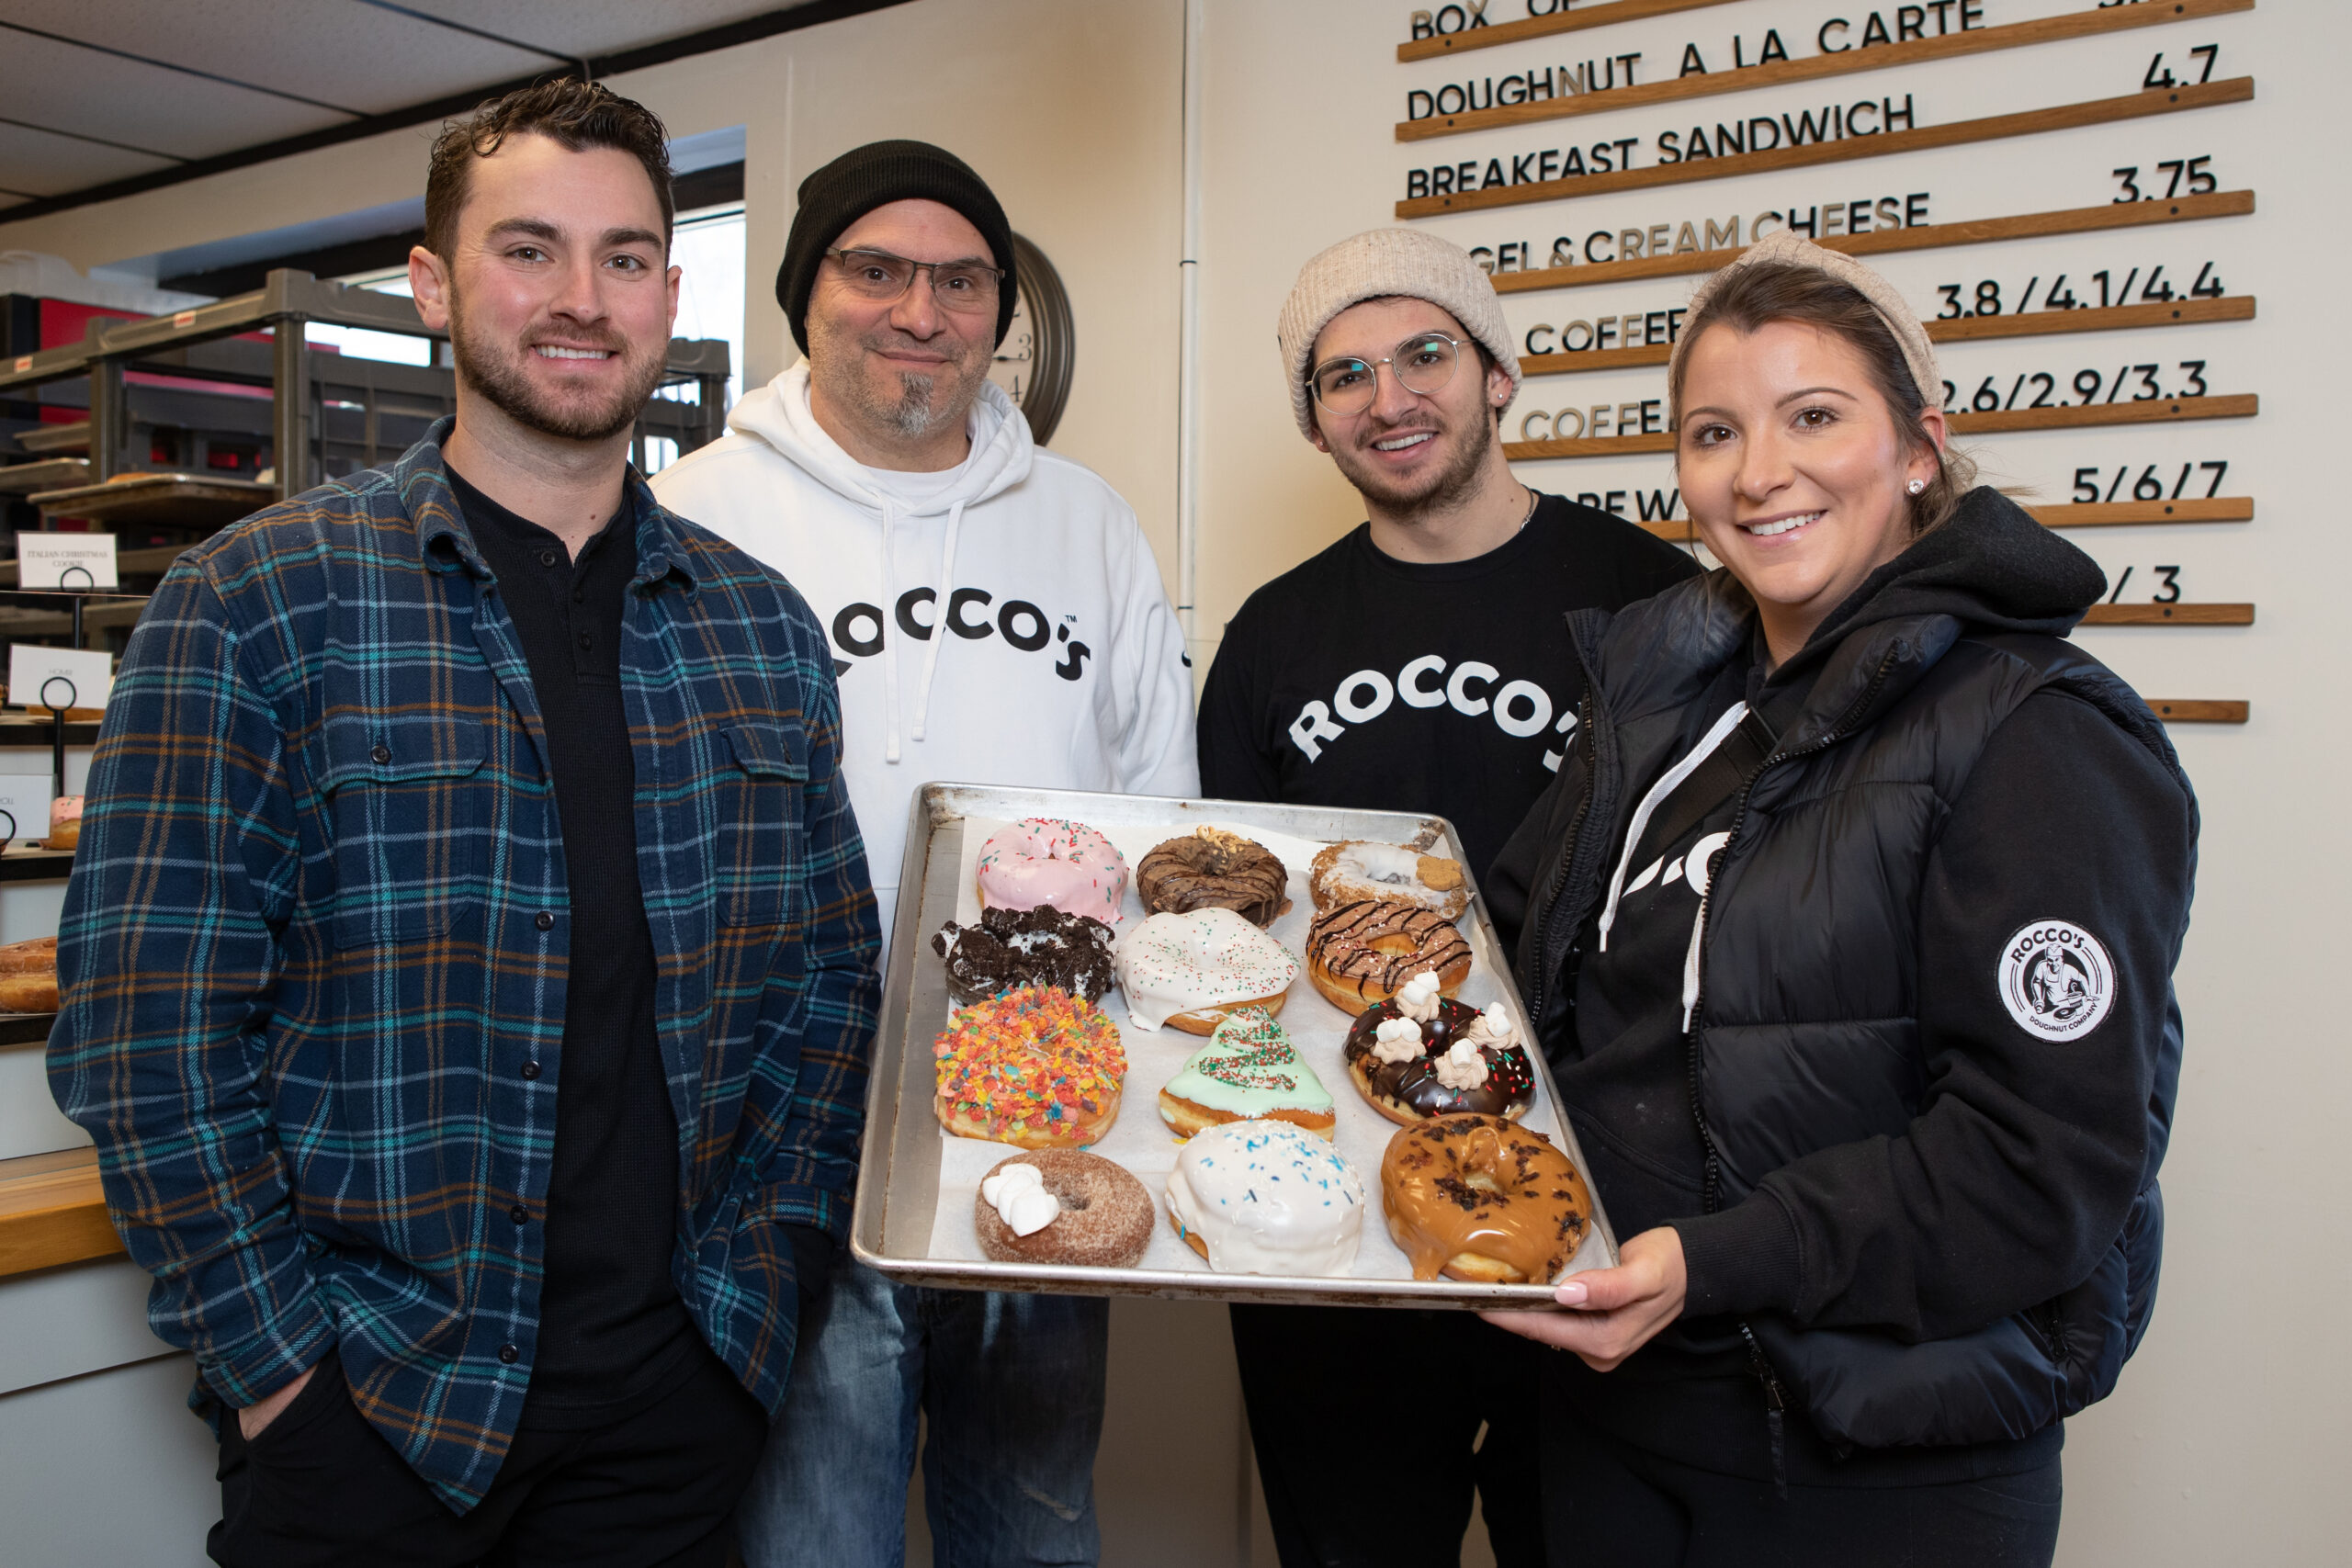 Joe Astrella, second from left, and his children Vicenzo, Domenic, and Lia are all part of the success of Rocco's Doughnuts